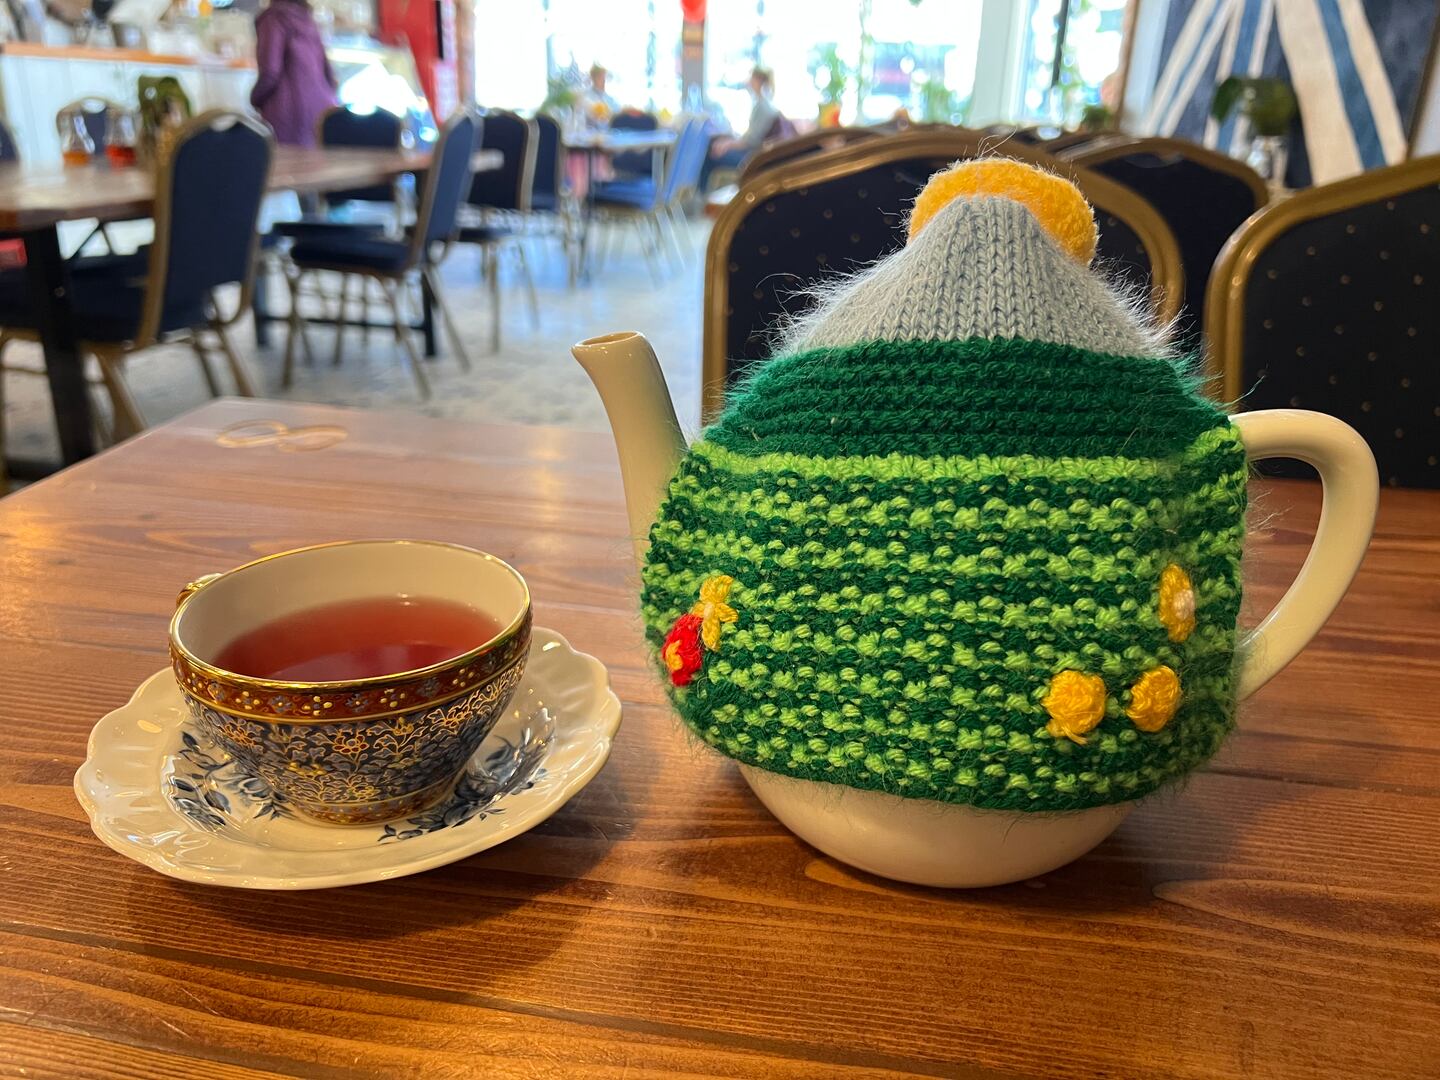 Emma's Tea Spot brings an authentic British tea experience to Baltimore.